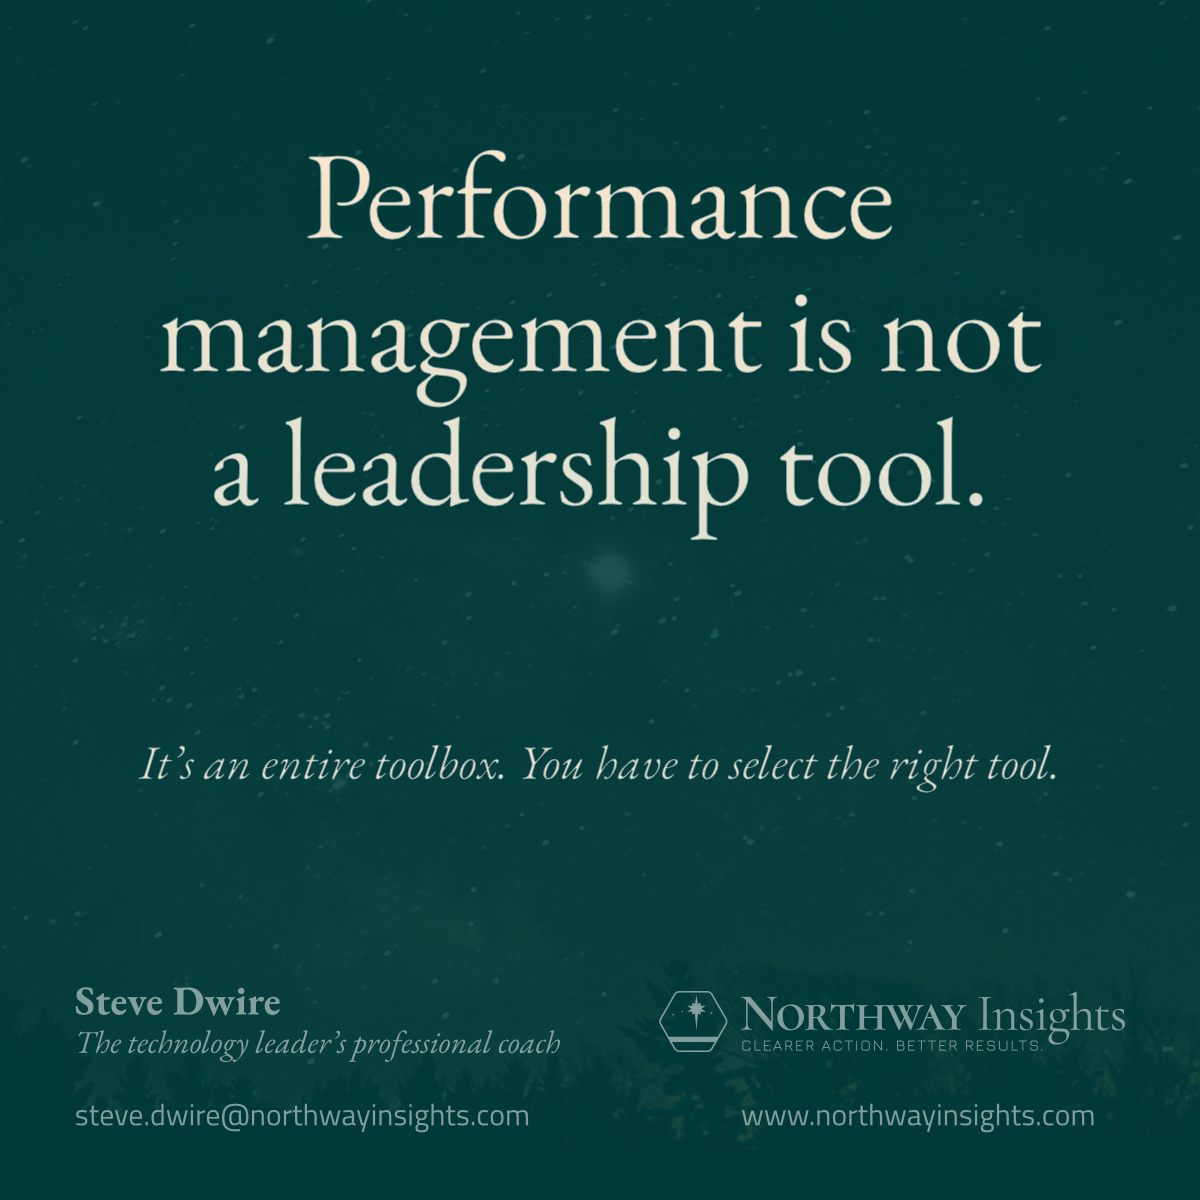 Performance management is not a leadership tool. (It's an entire toolbox. You have to select the right tool.)